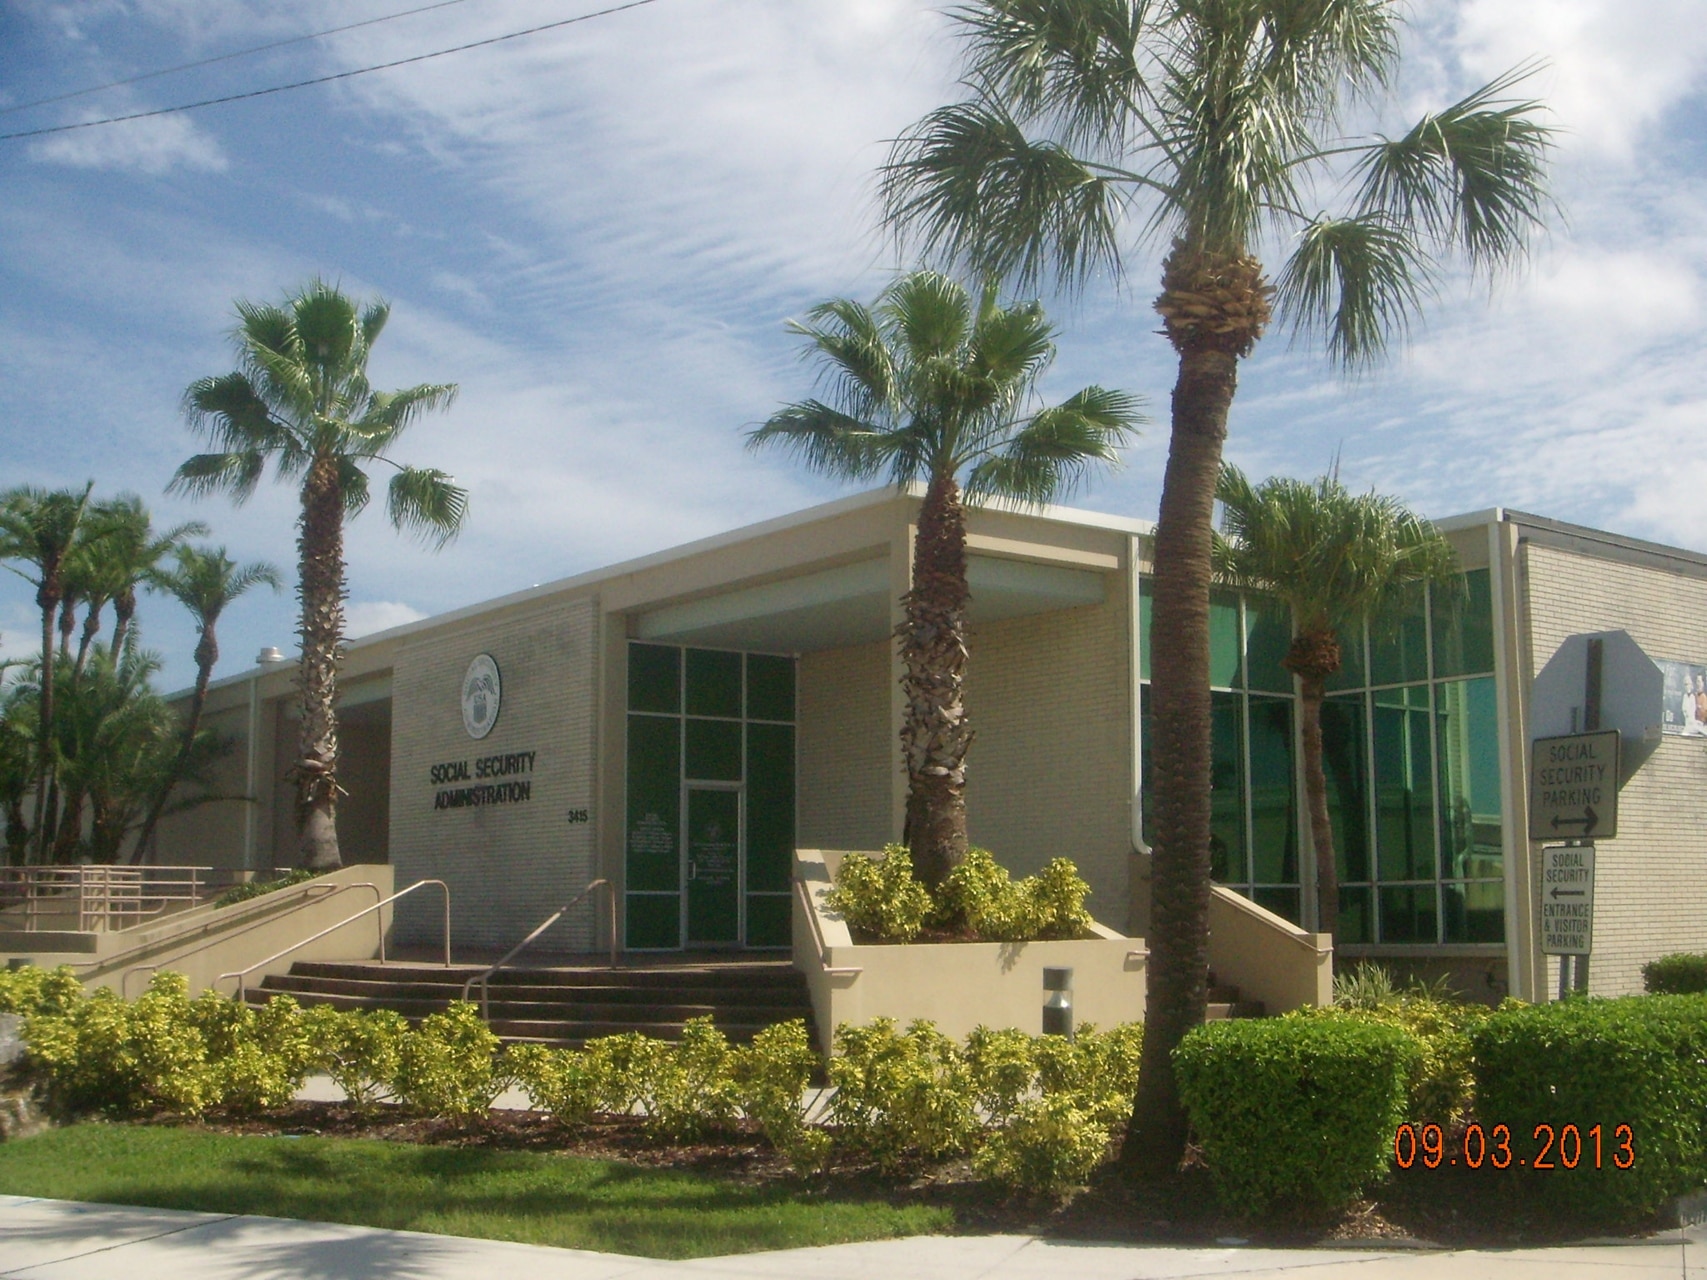 Social Security Office in Tampa